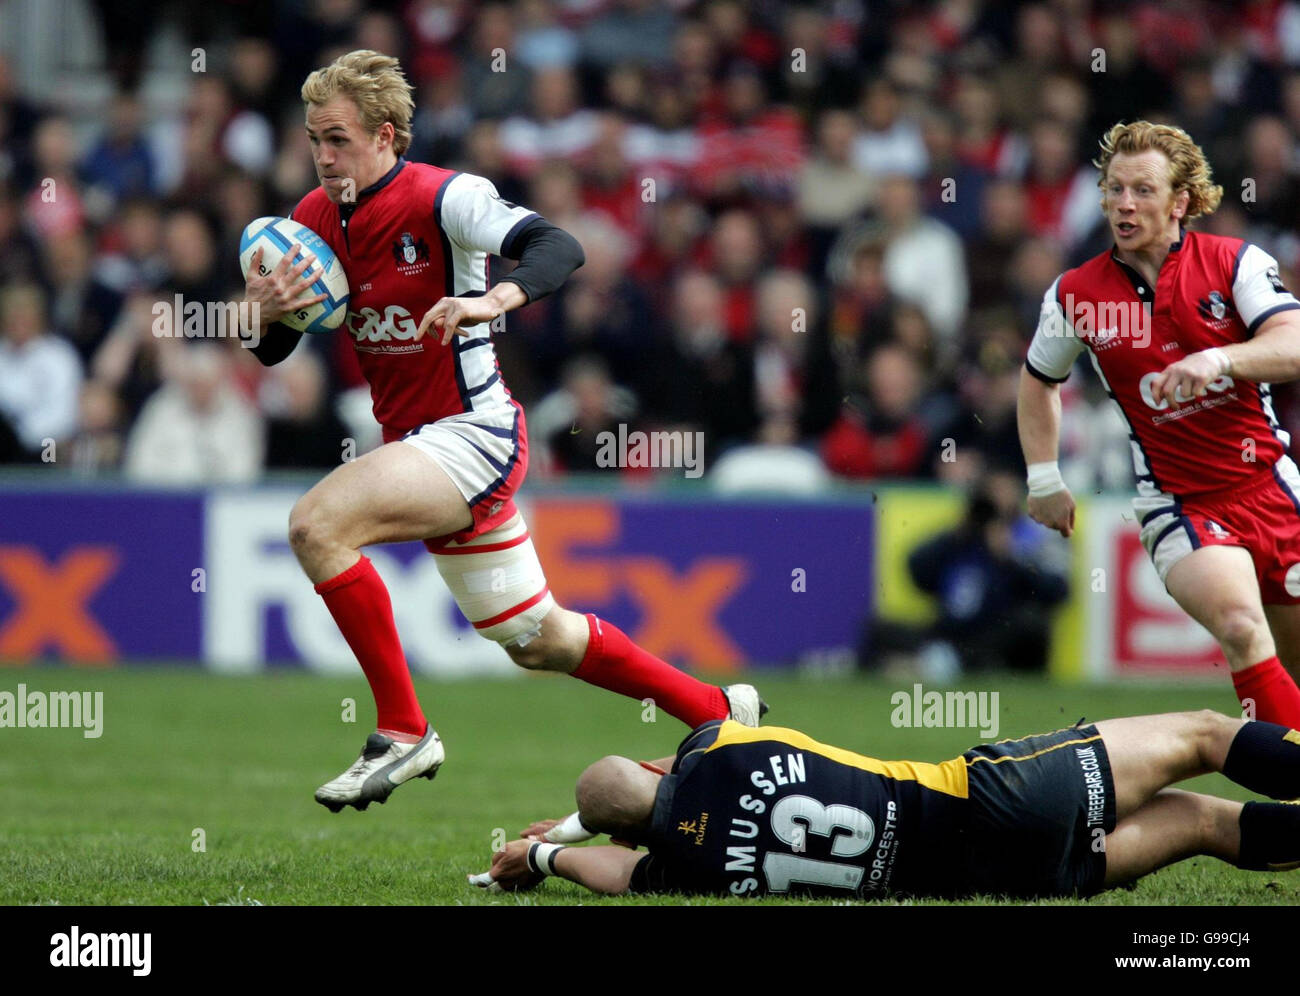 Gloucester's Olly Morgan breaks away from Worcester's Dale Rasmussen during the European Challenge Cup semi-final match at Kingsholm, Gloucester. Stock Photo